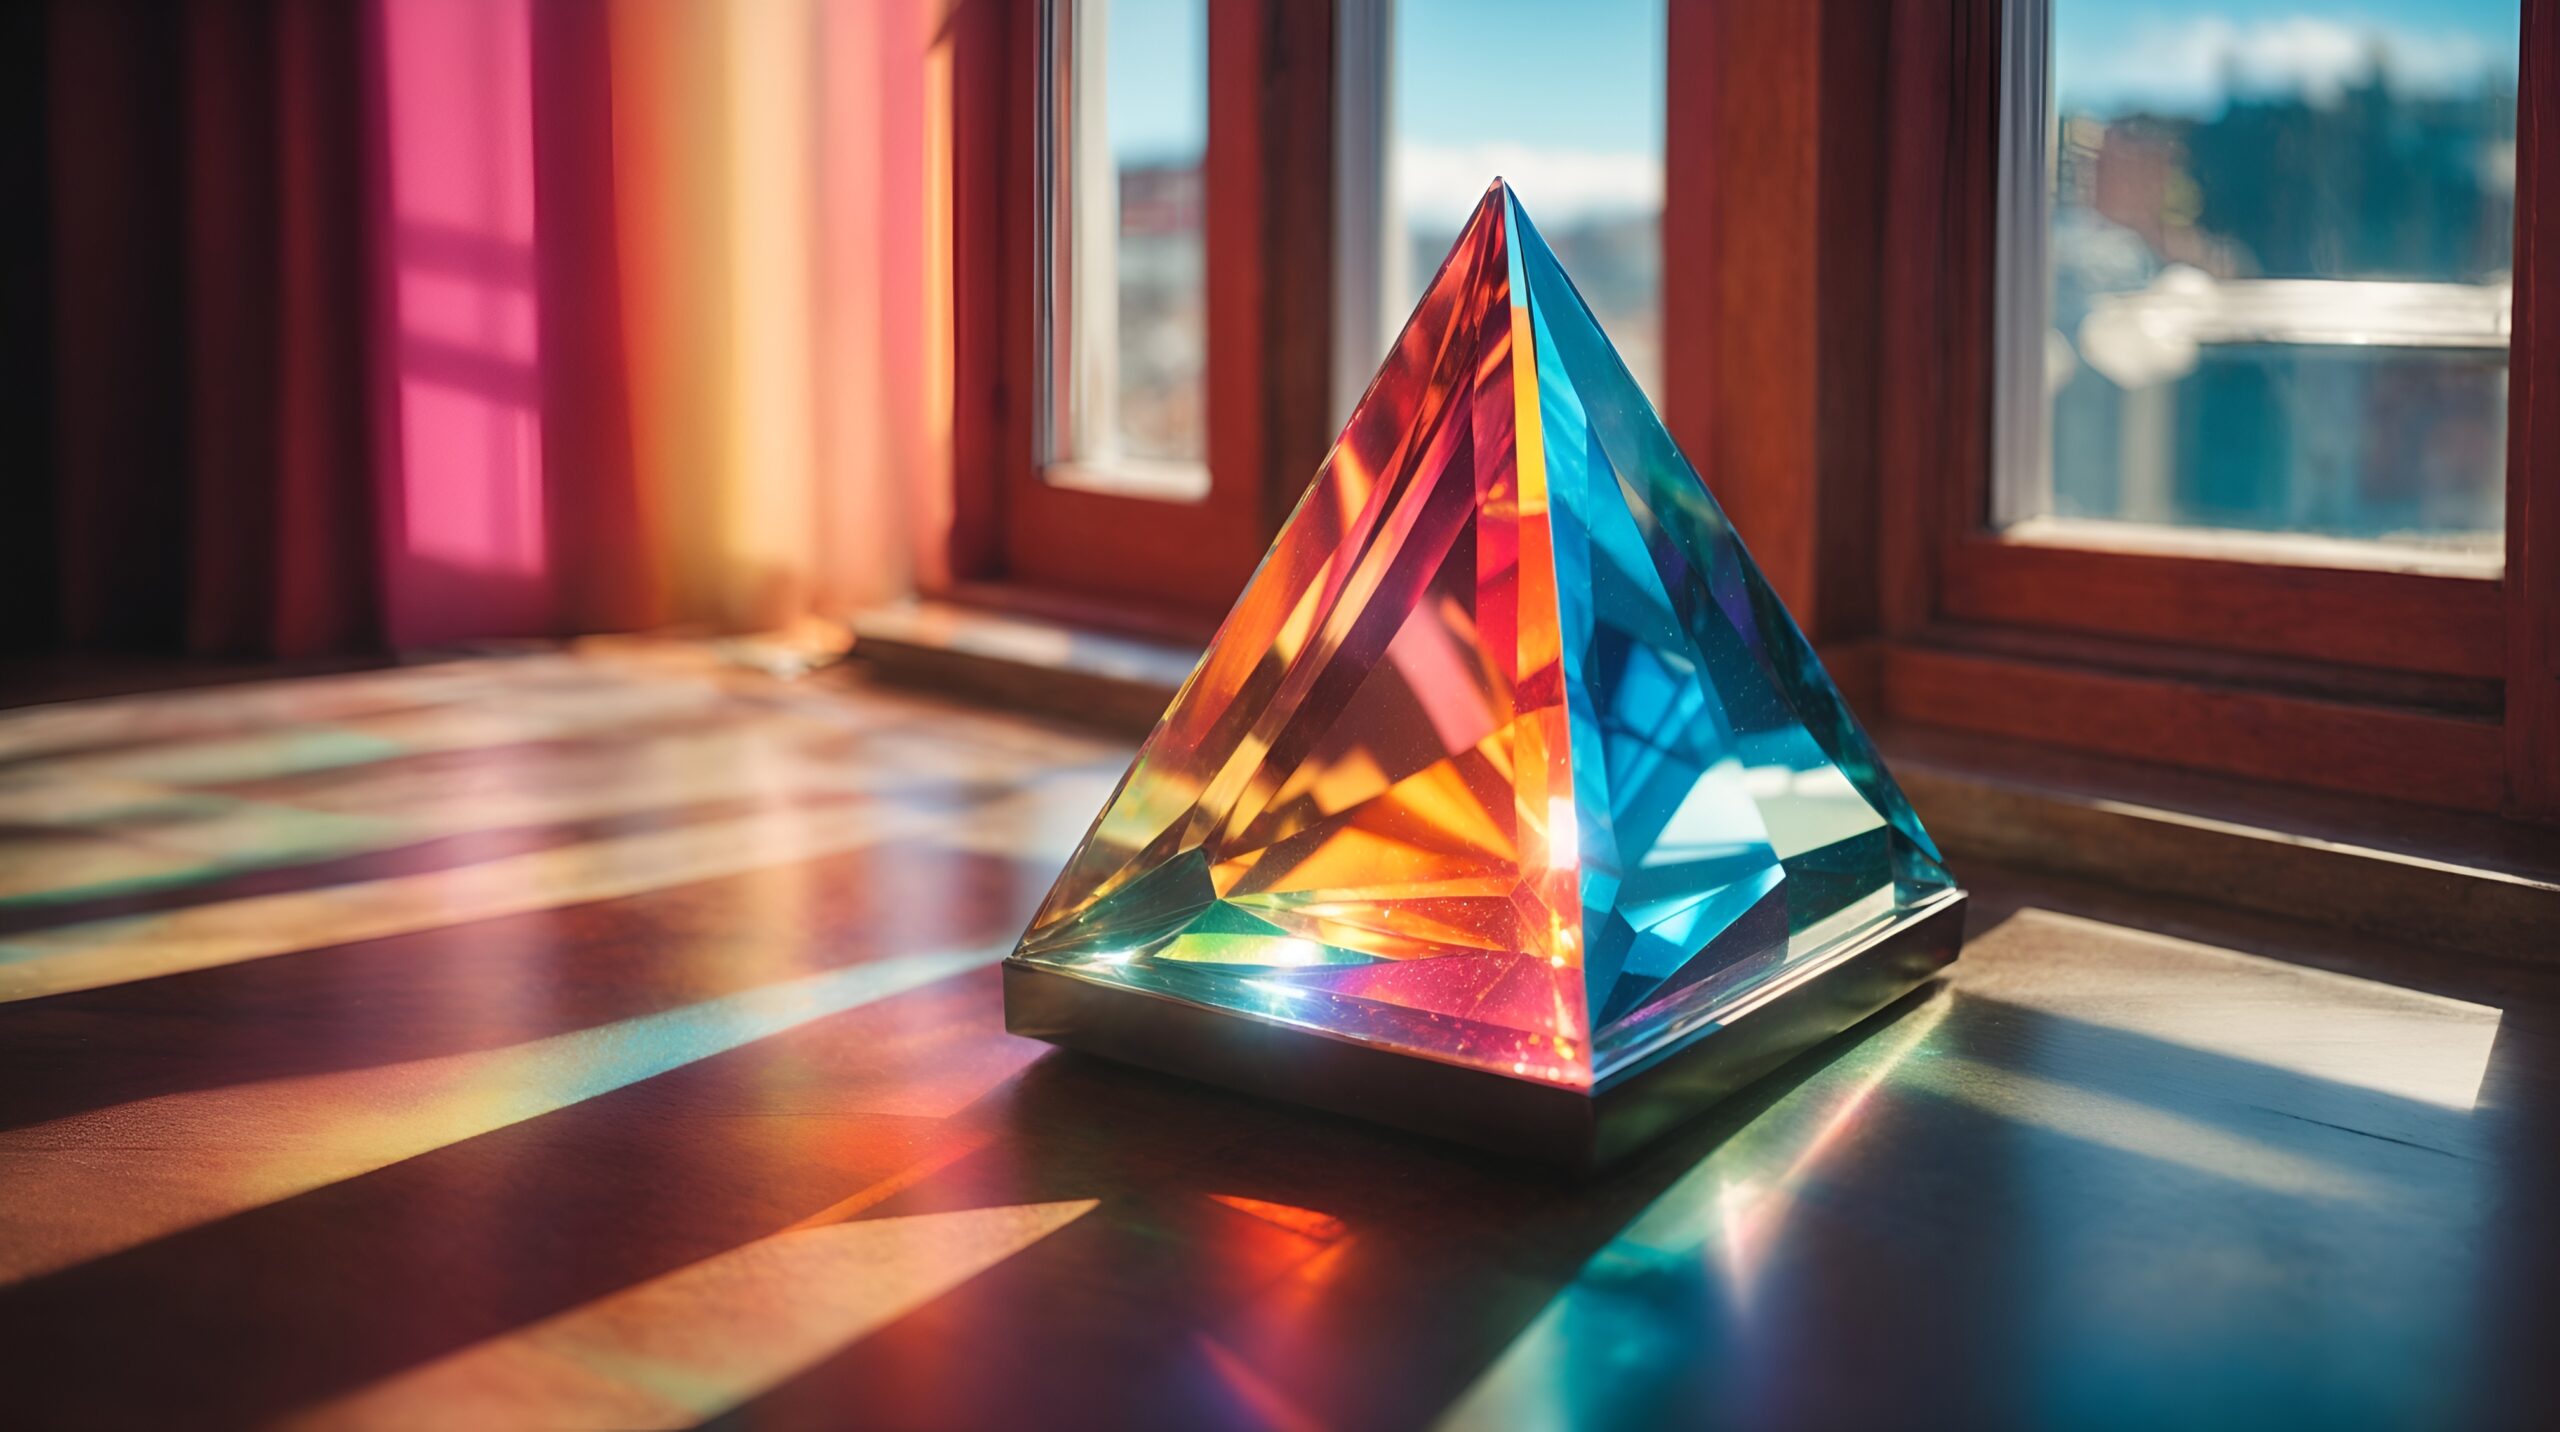 A prism resting on a windowsill bathed in the morning light